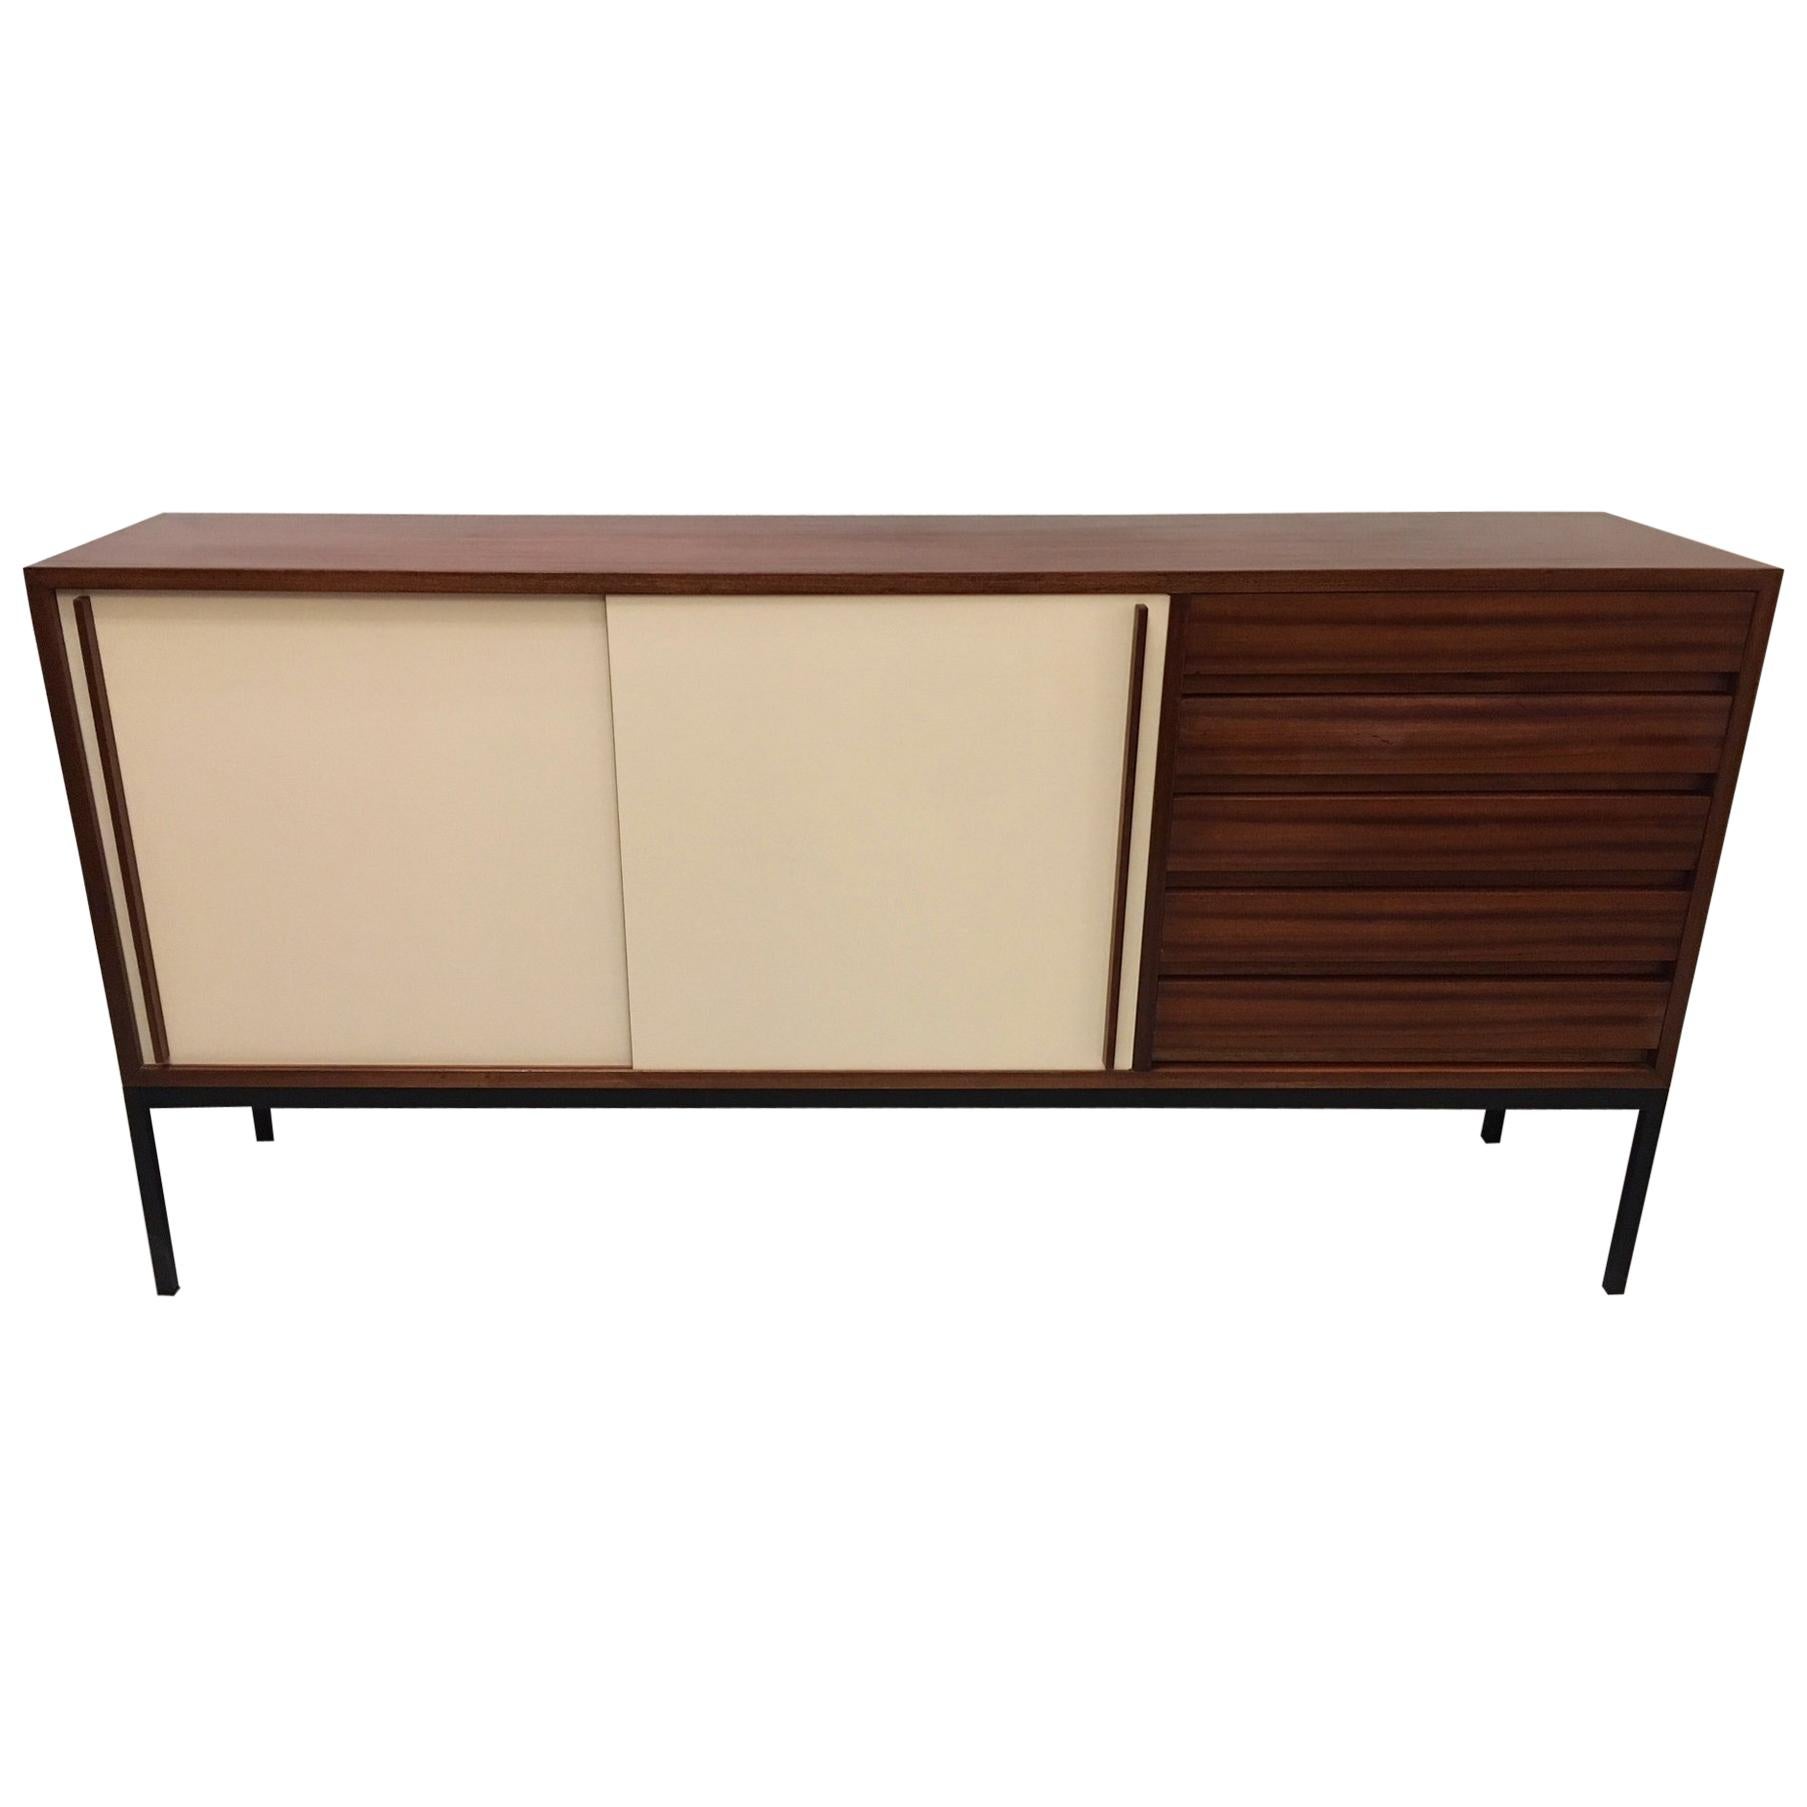 1950s Swiss Sideboard by Victoria